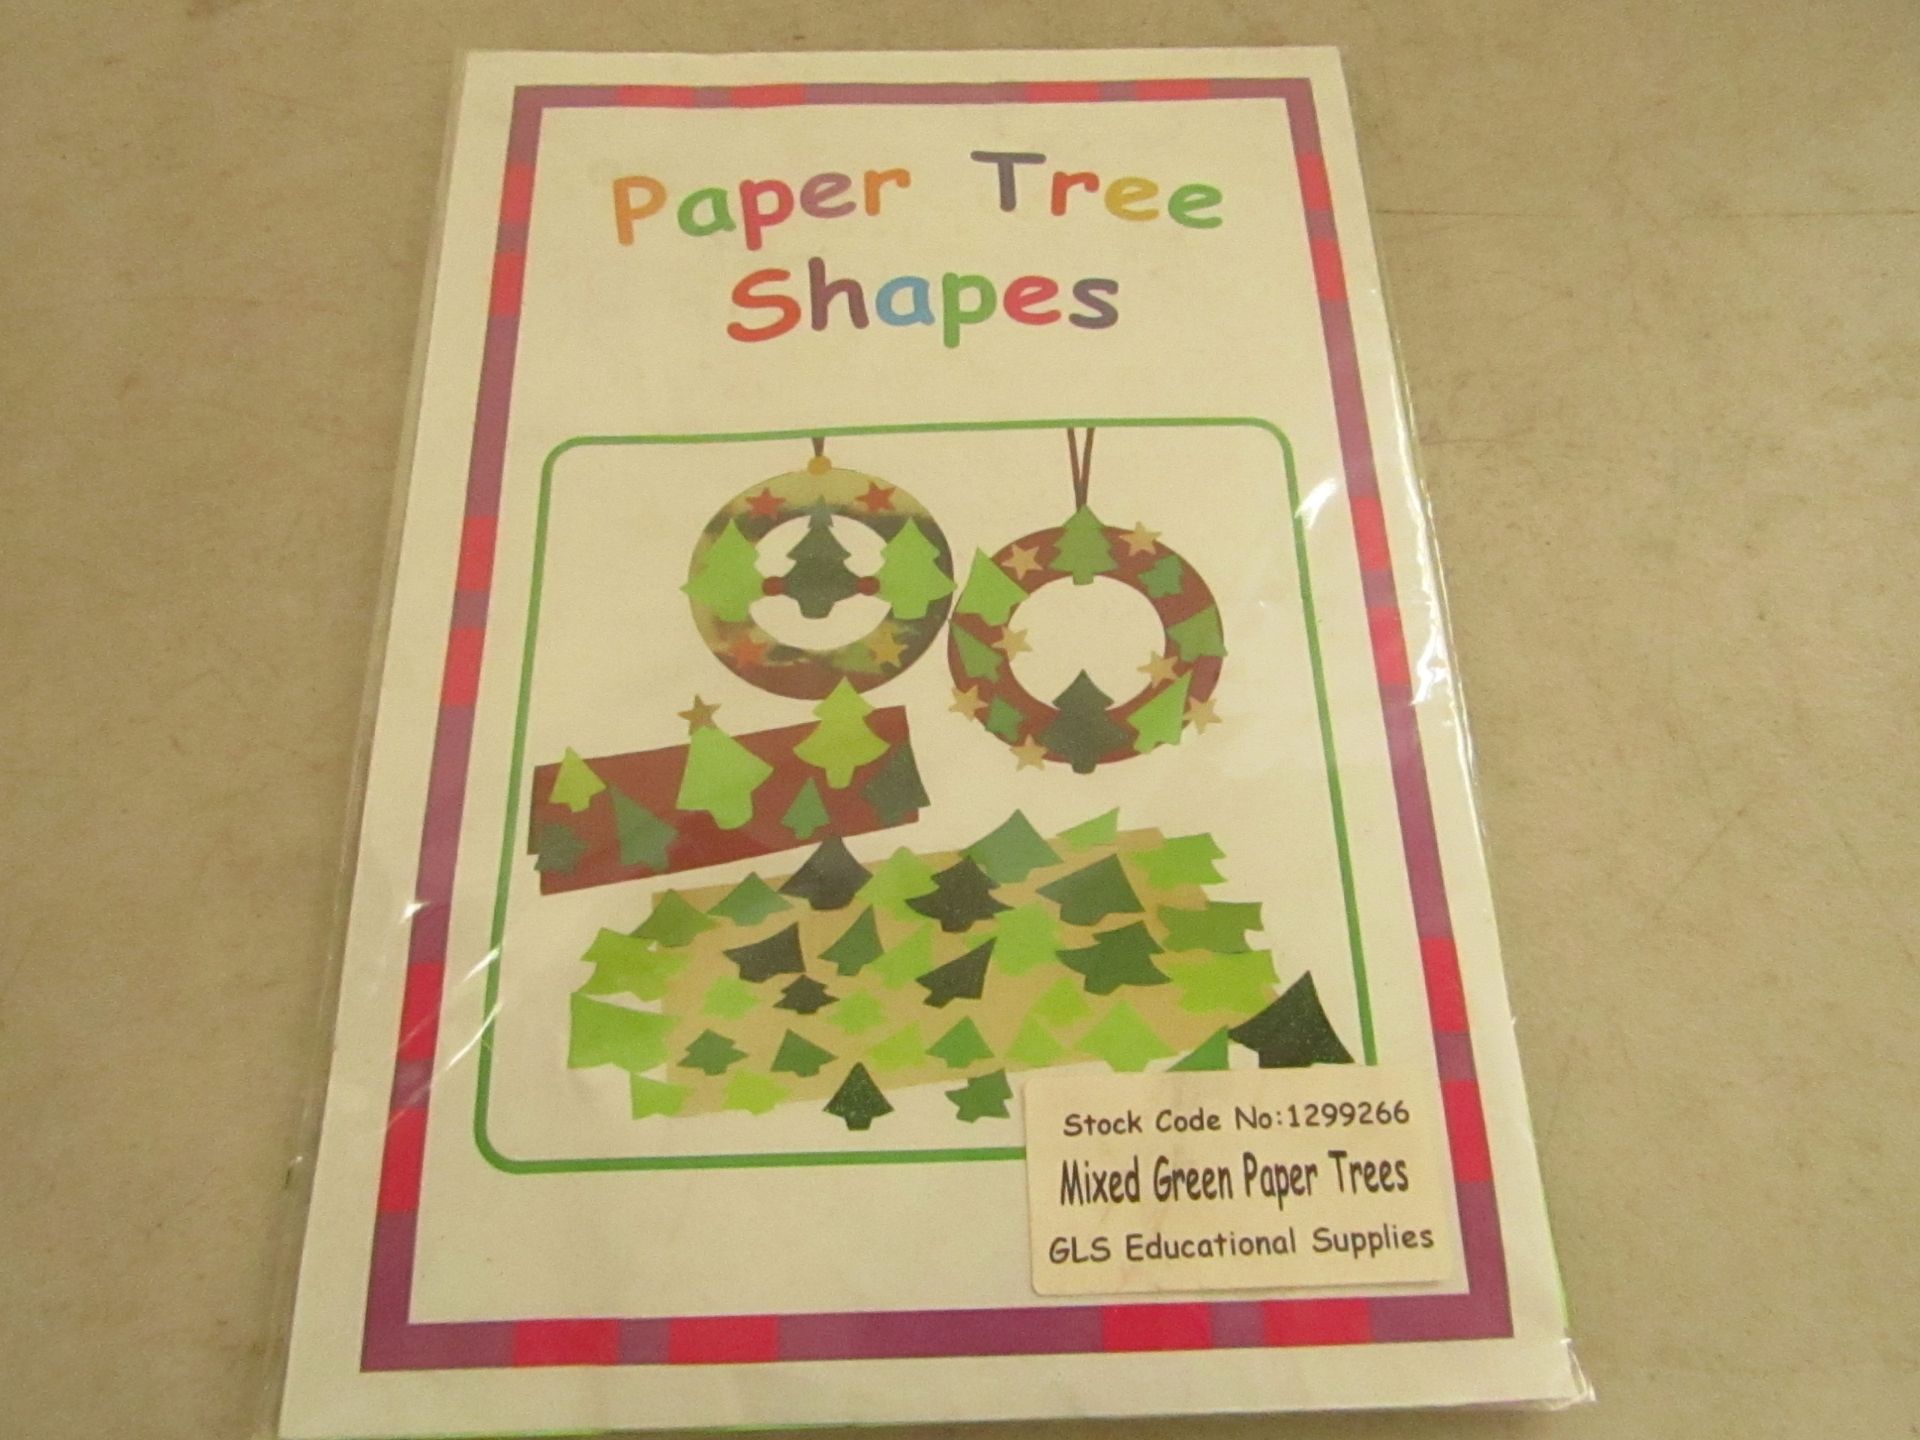 Approximately 25x Packs of paper tree shapes, new in packaging. Total RRP £285 SKU code - 143630